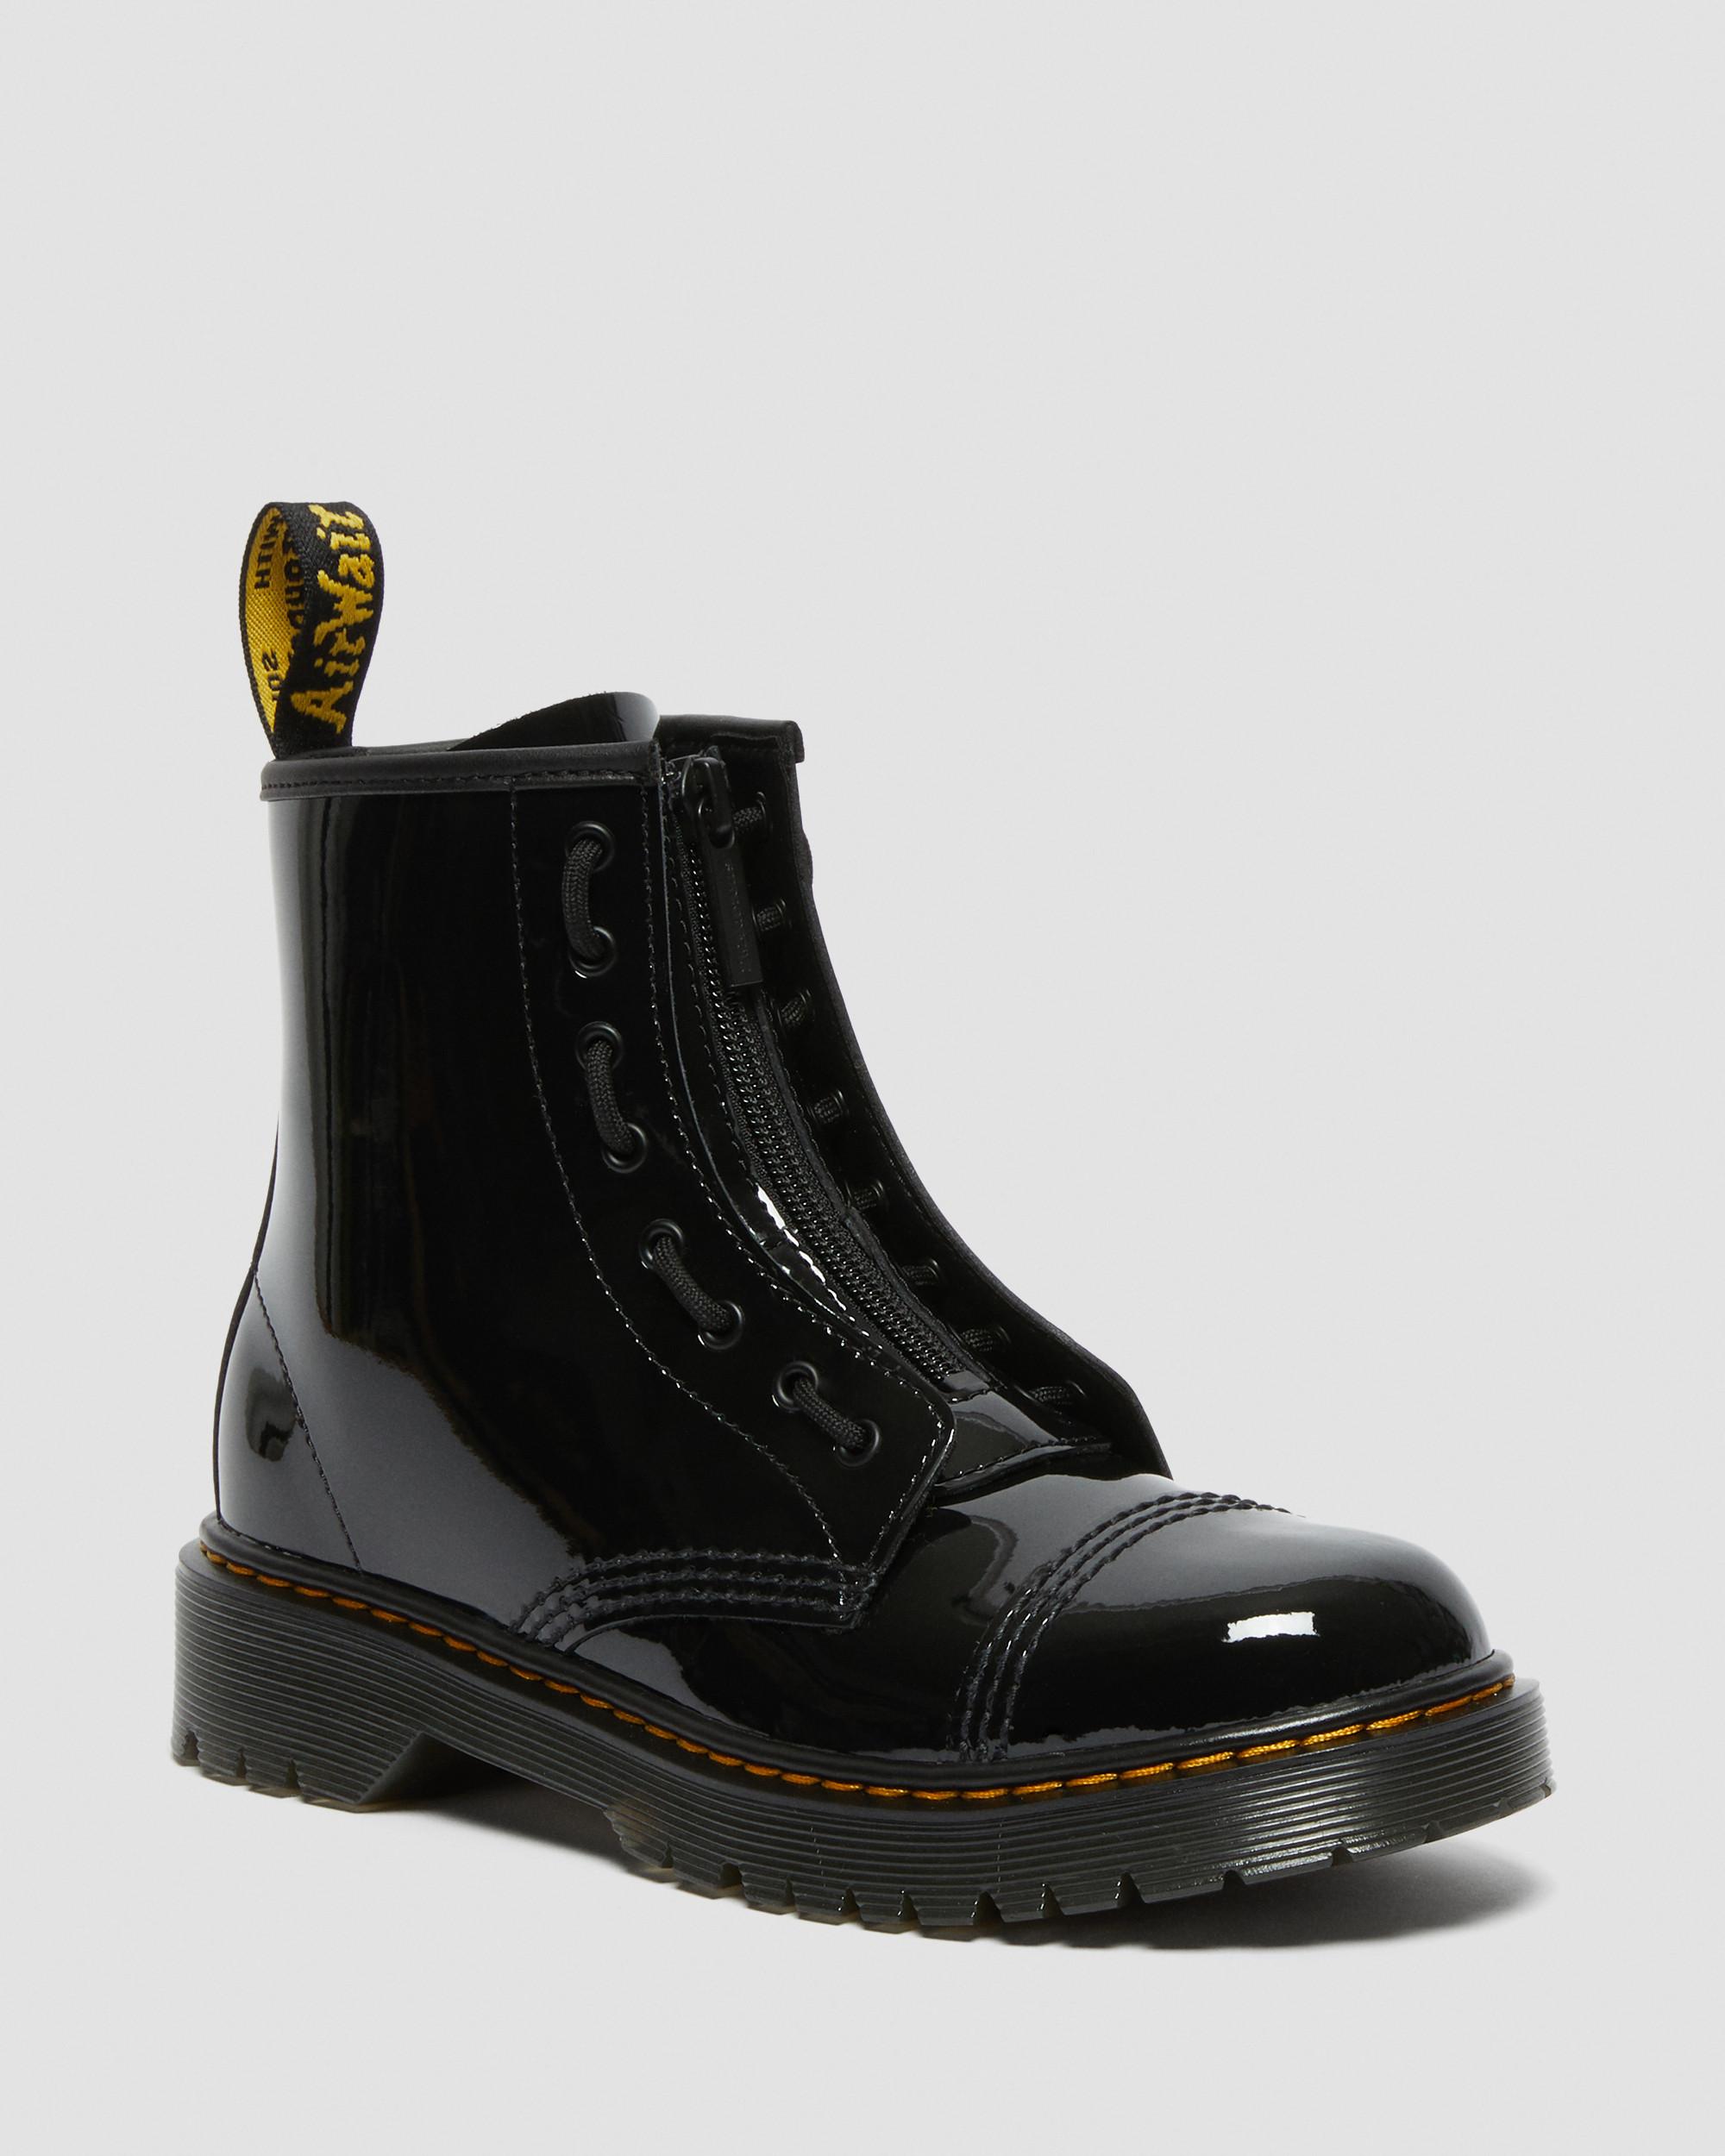 Dr. Leather | Lace Softy Martens Boots 1460 Black Youth T Up in